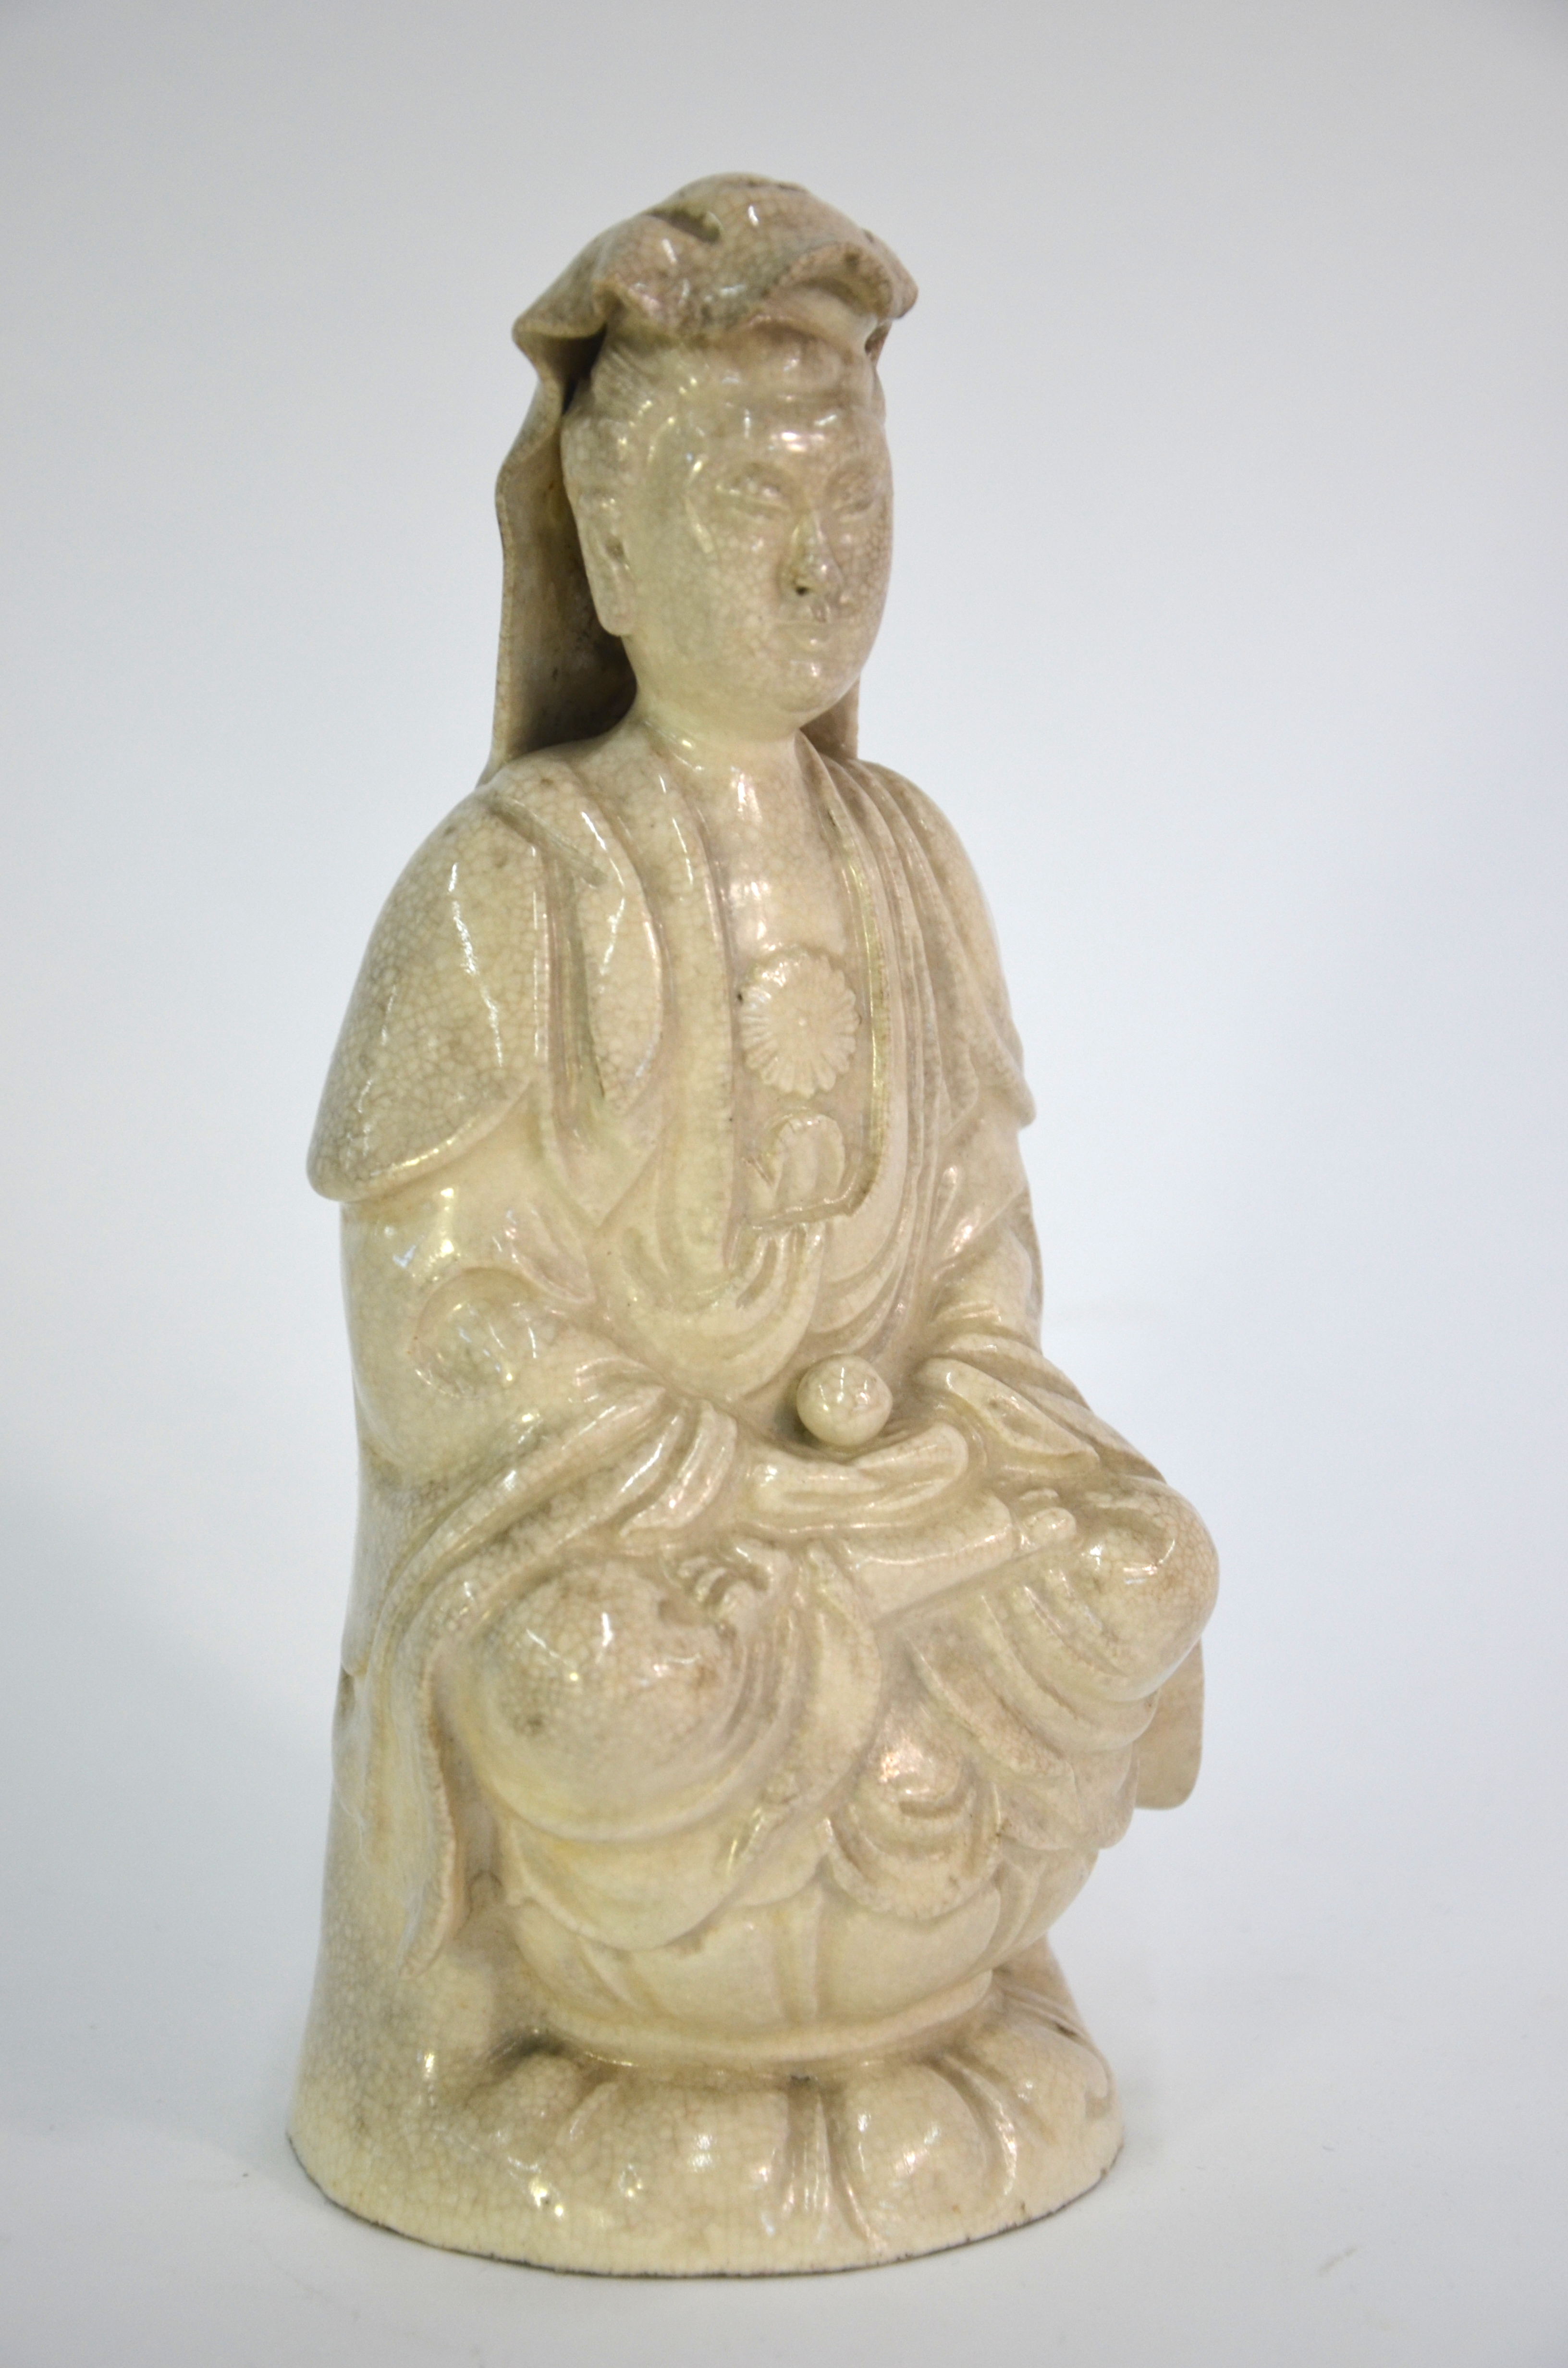 A blanc-de-chine style figure of Guanyin, the Bodhisattva of Mercy; seated in dhyanasana on a